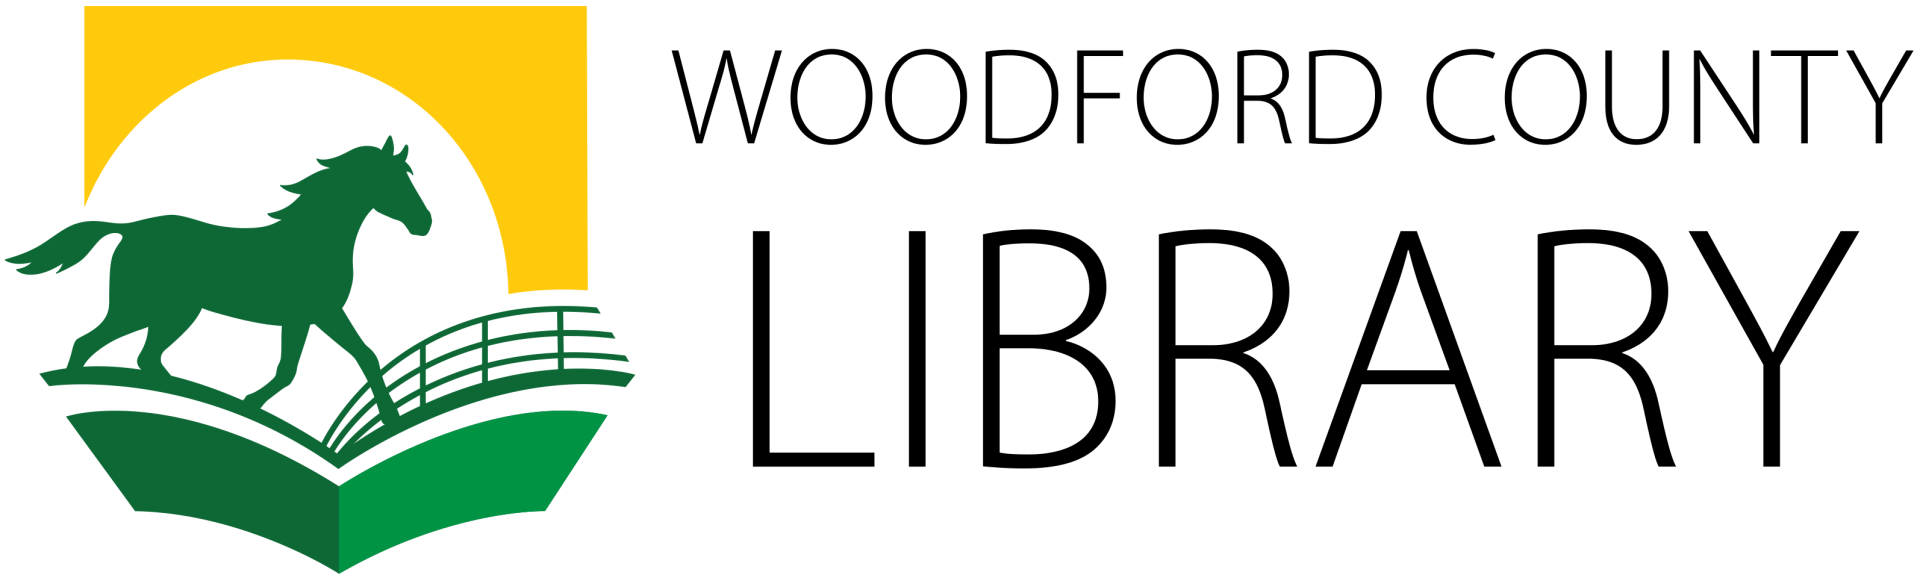 Woodford County Library Logo